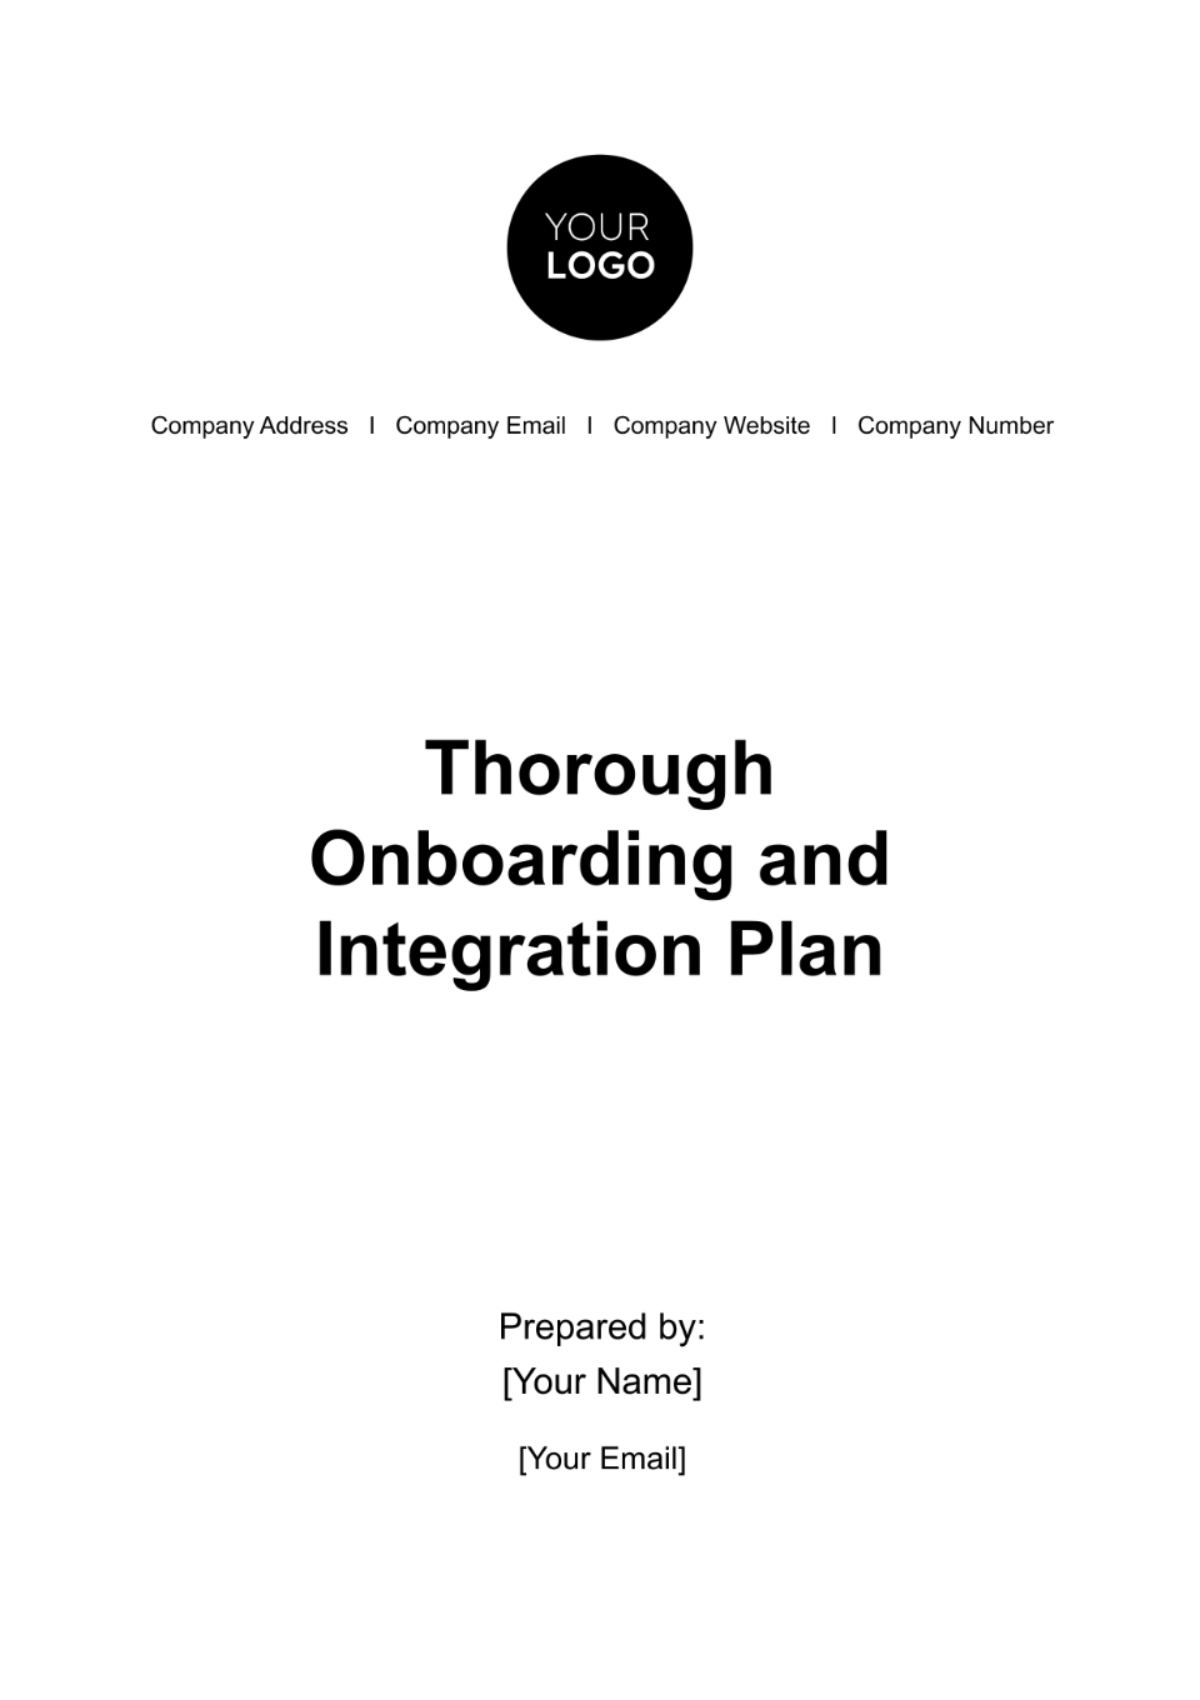 Free Thorough Onboarding and Integration Plan HR Template